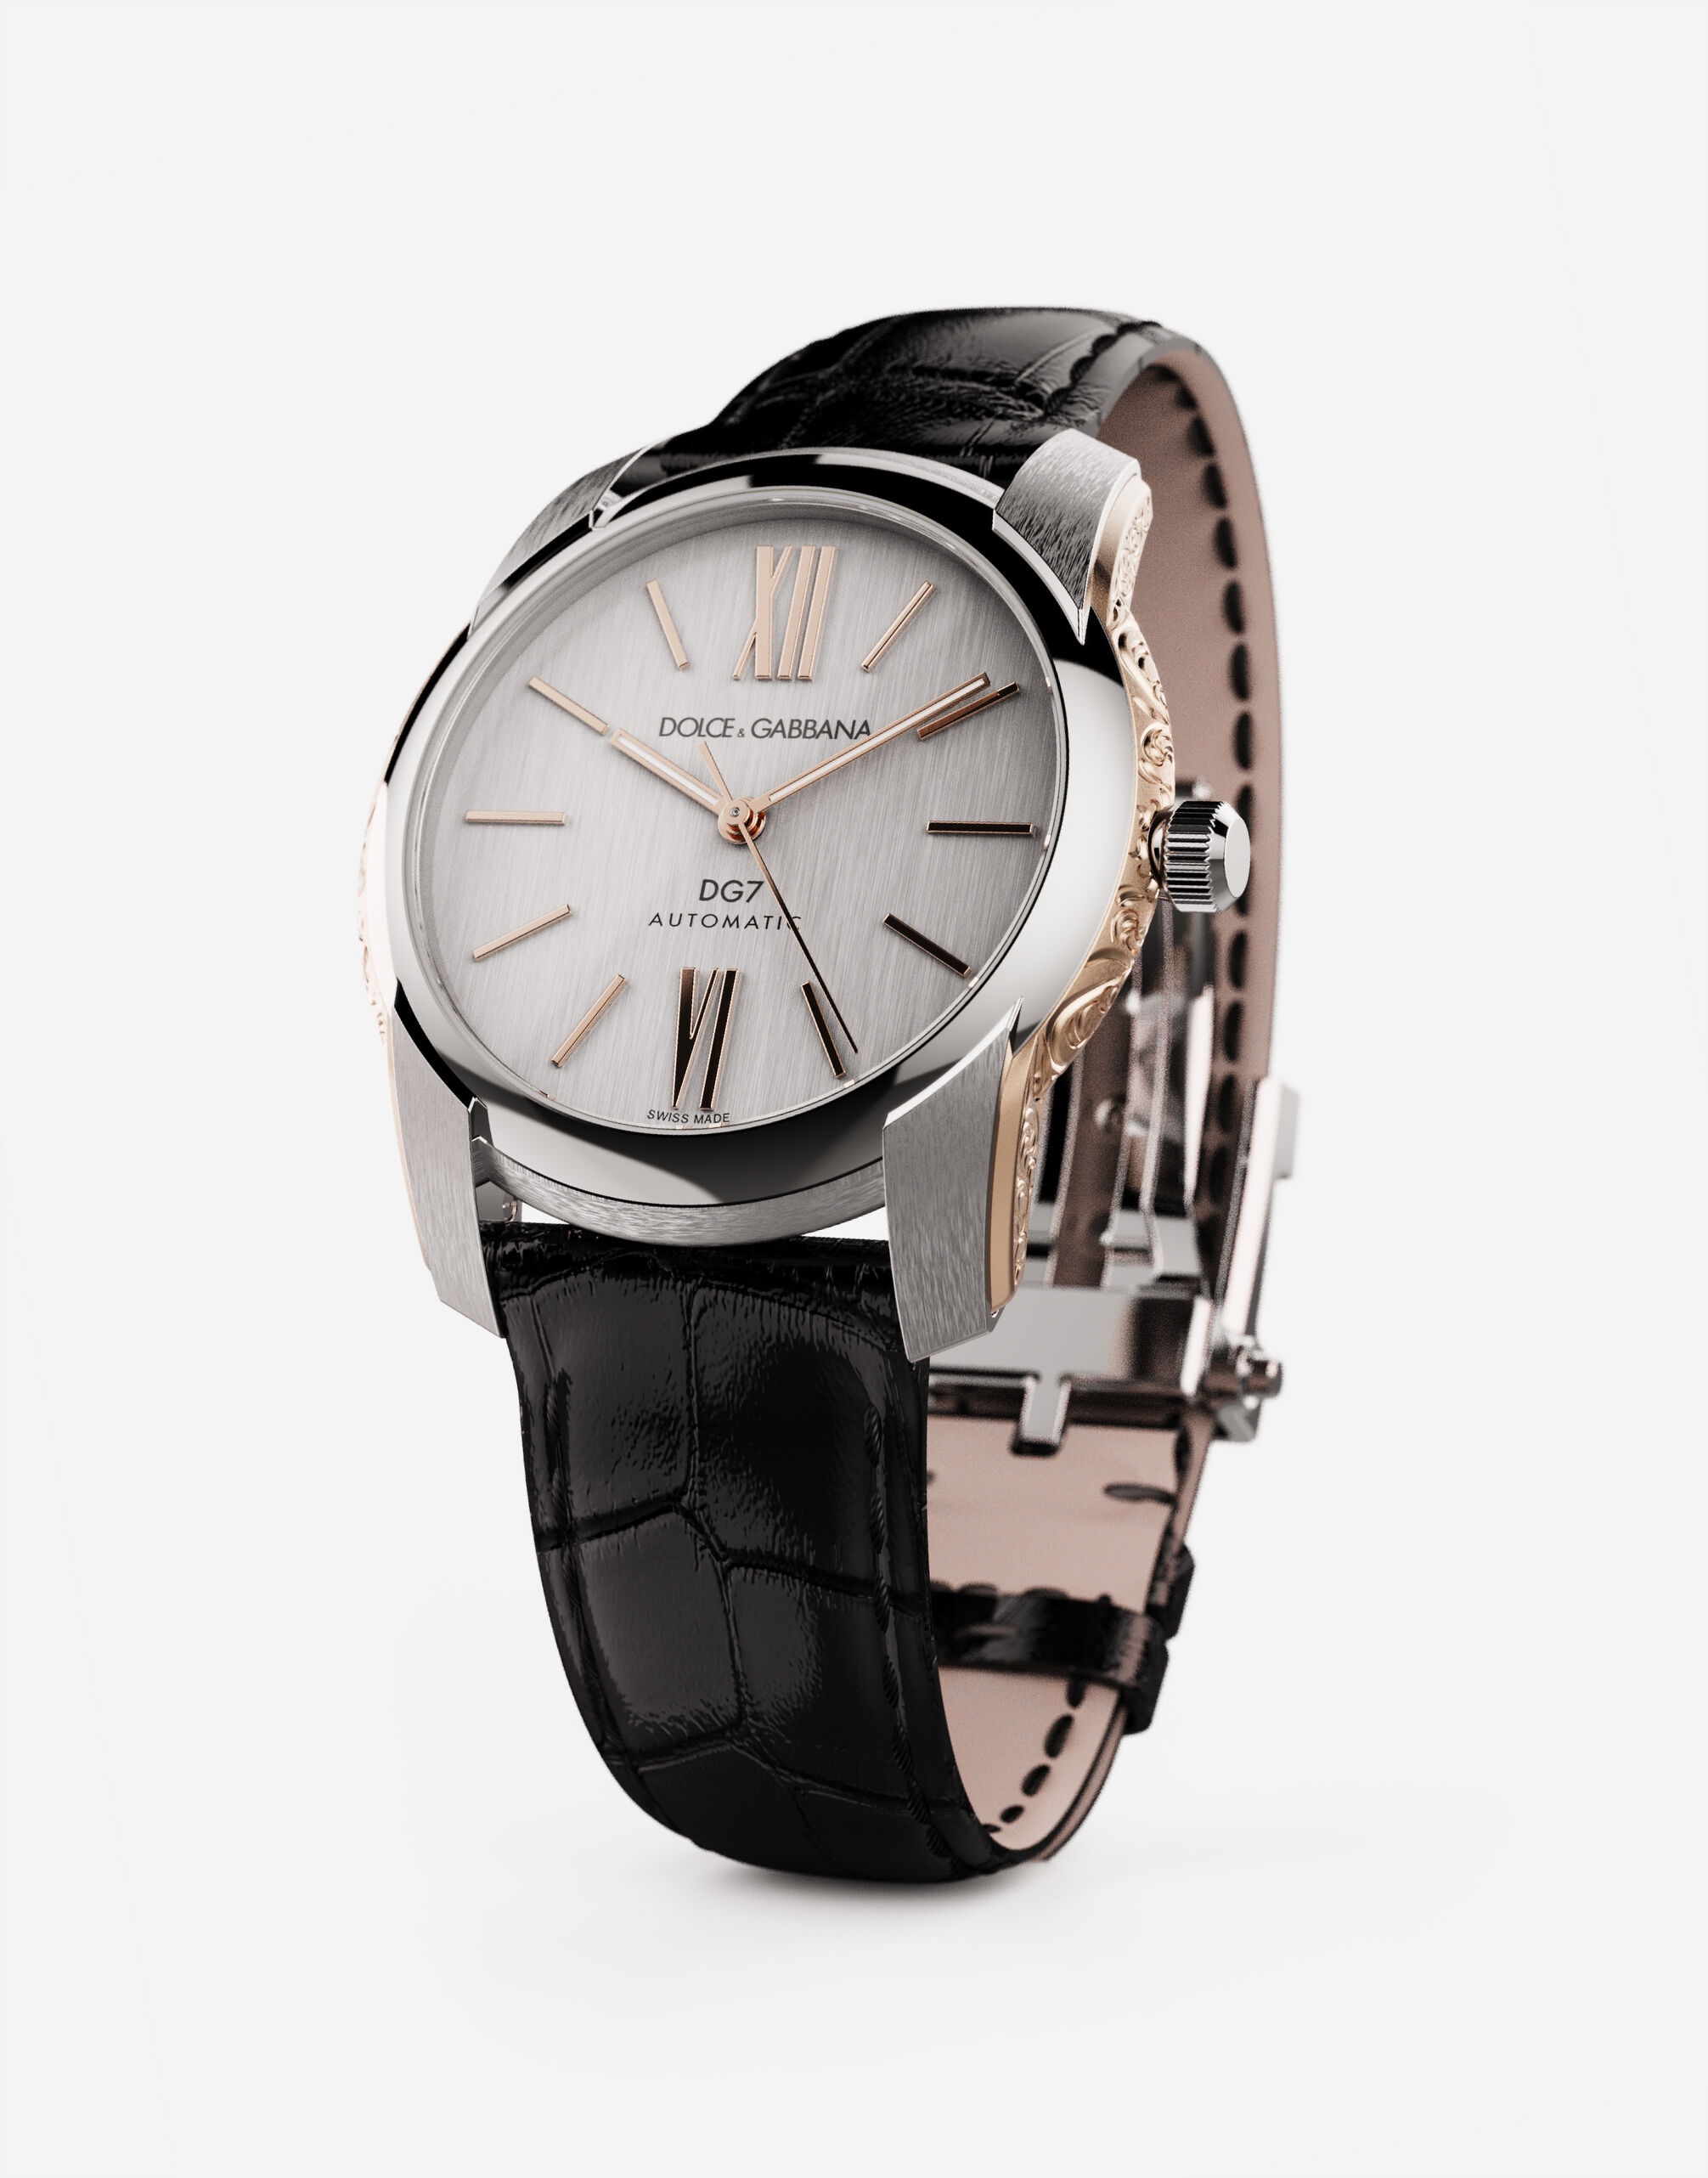 DG7 watch in steel with engraved side decoration in gold - 3